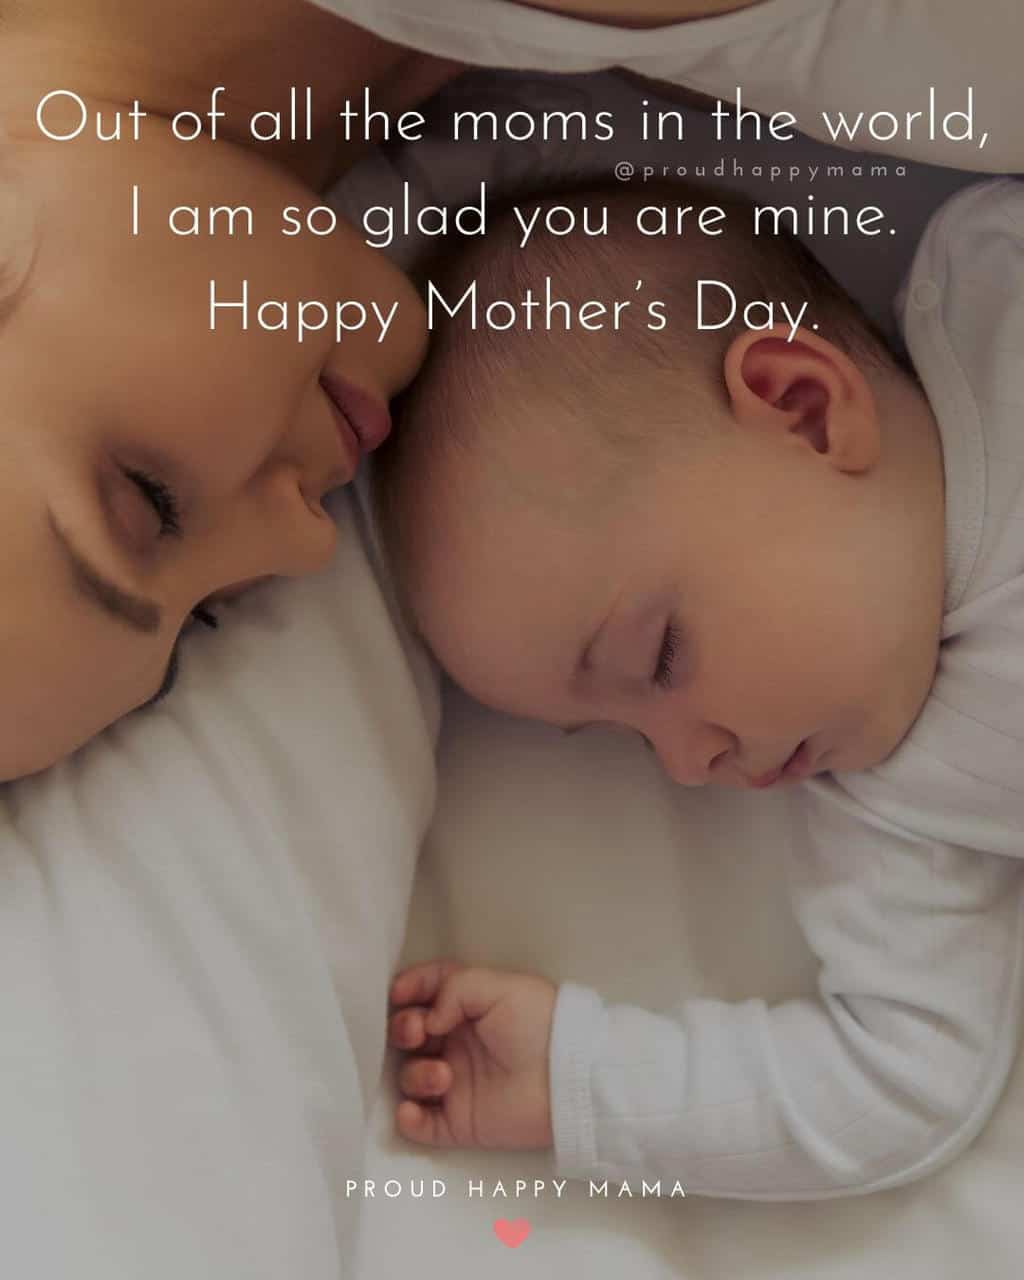 Mother Son Relationship Quotes | Out of all the moms in the world, I am so glad you are mine. Happy Mother’s Day.